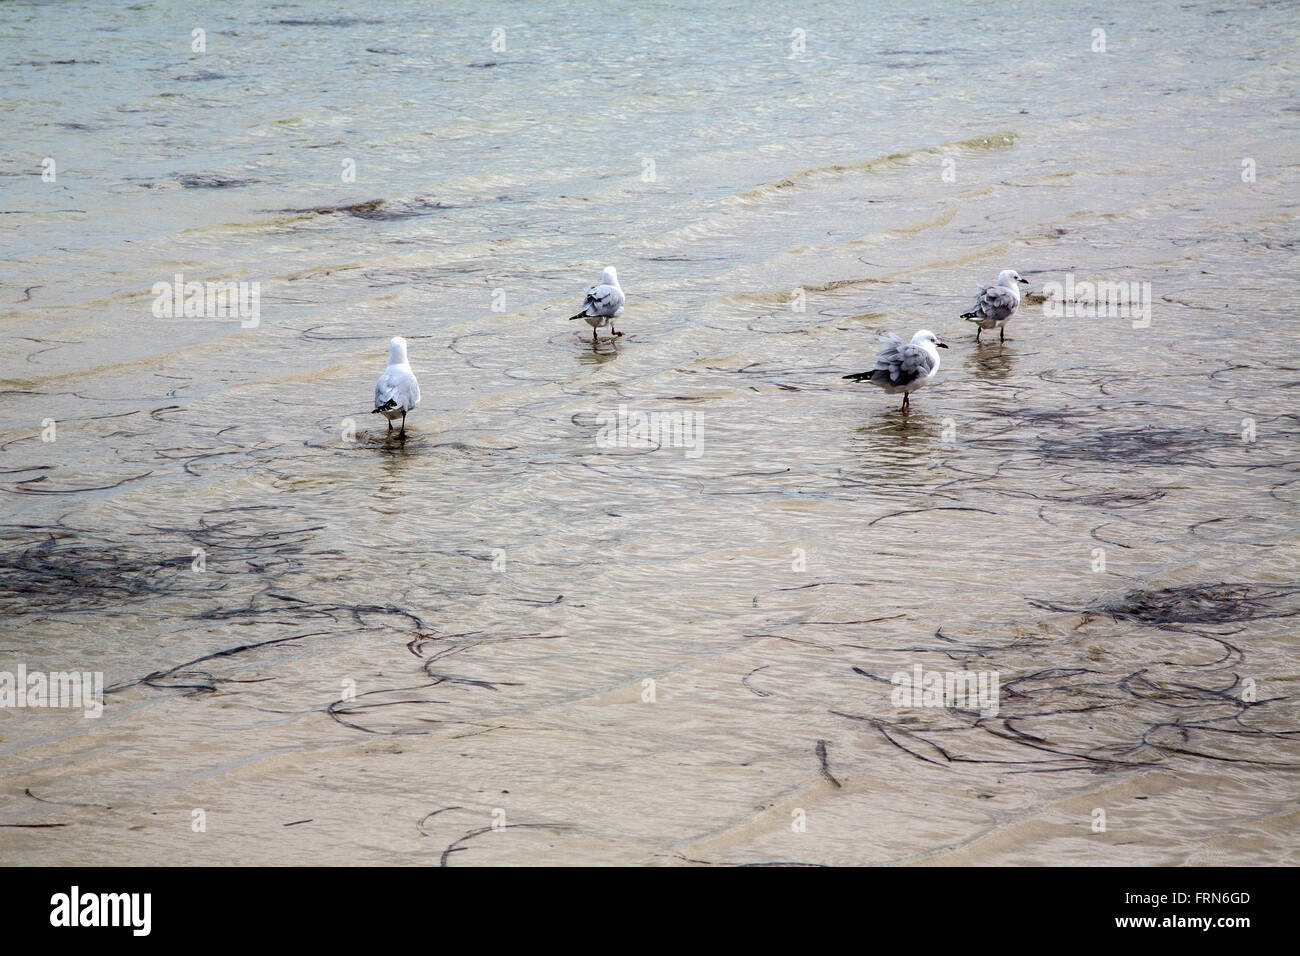 four seabirds in shallow water of sand beach with some seaweed, Gulf St Vincent, South Australia Stock Photo